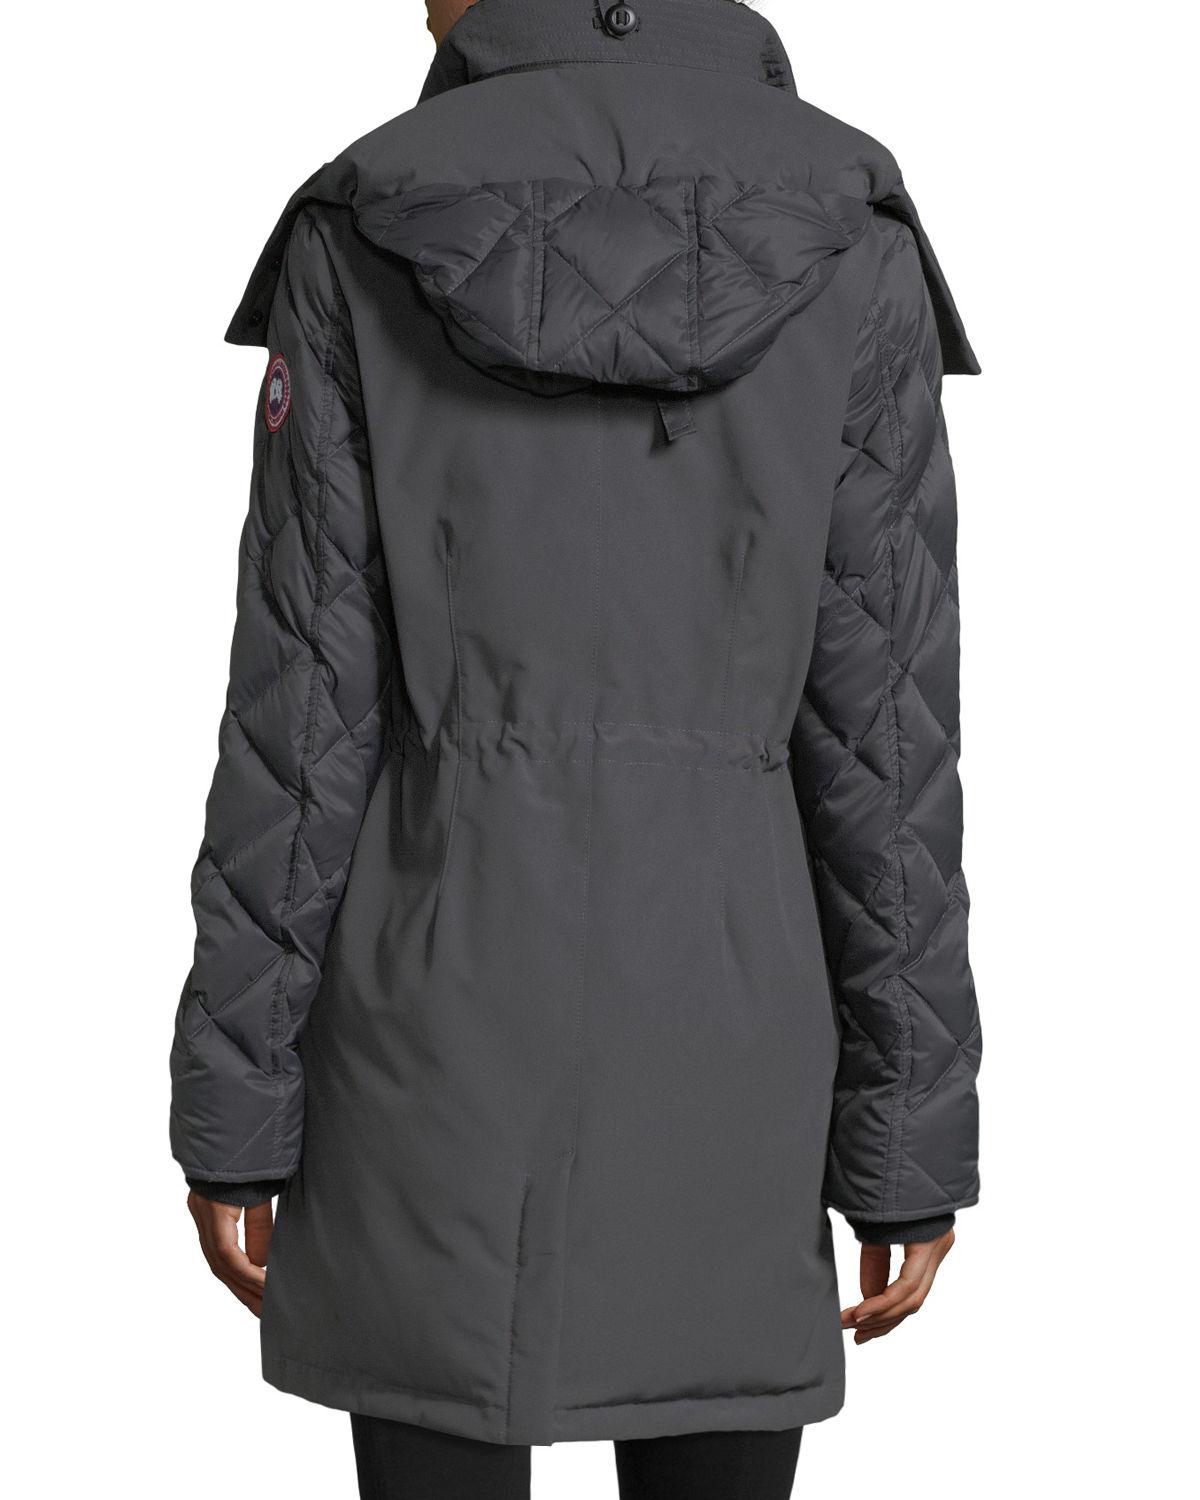 Canada Goose Goose Elwin Hooded Parka Jacket W Removable